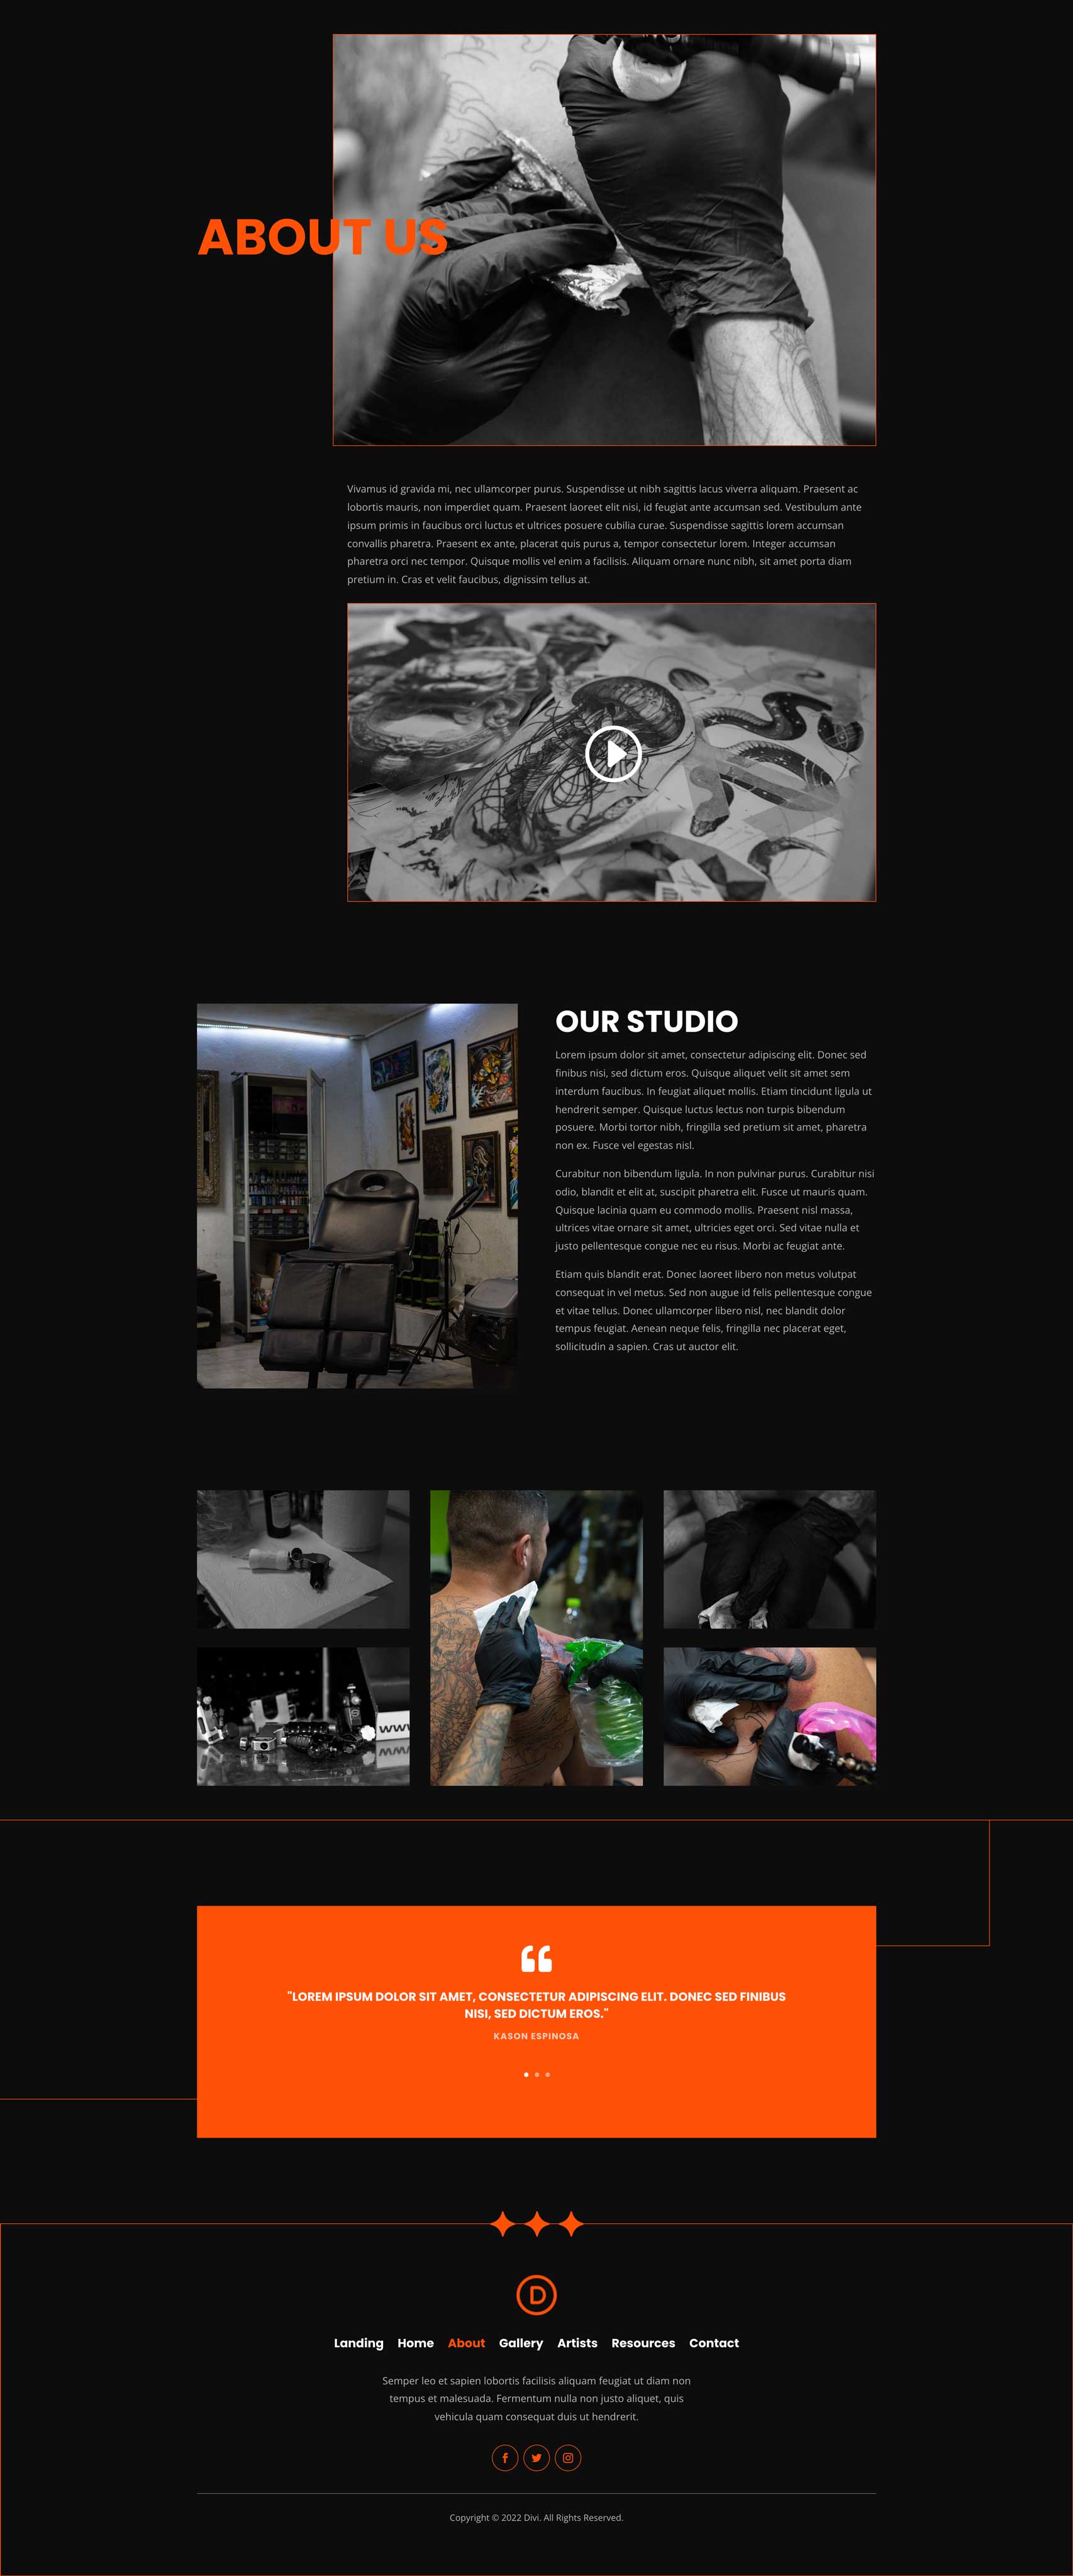 Tattoo Shop Layout Pack for Divi